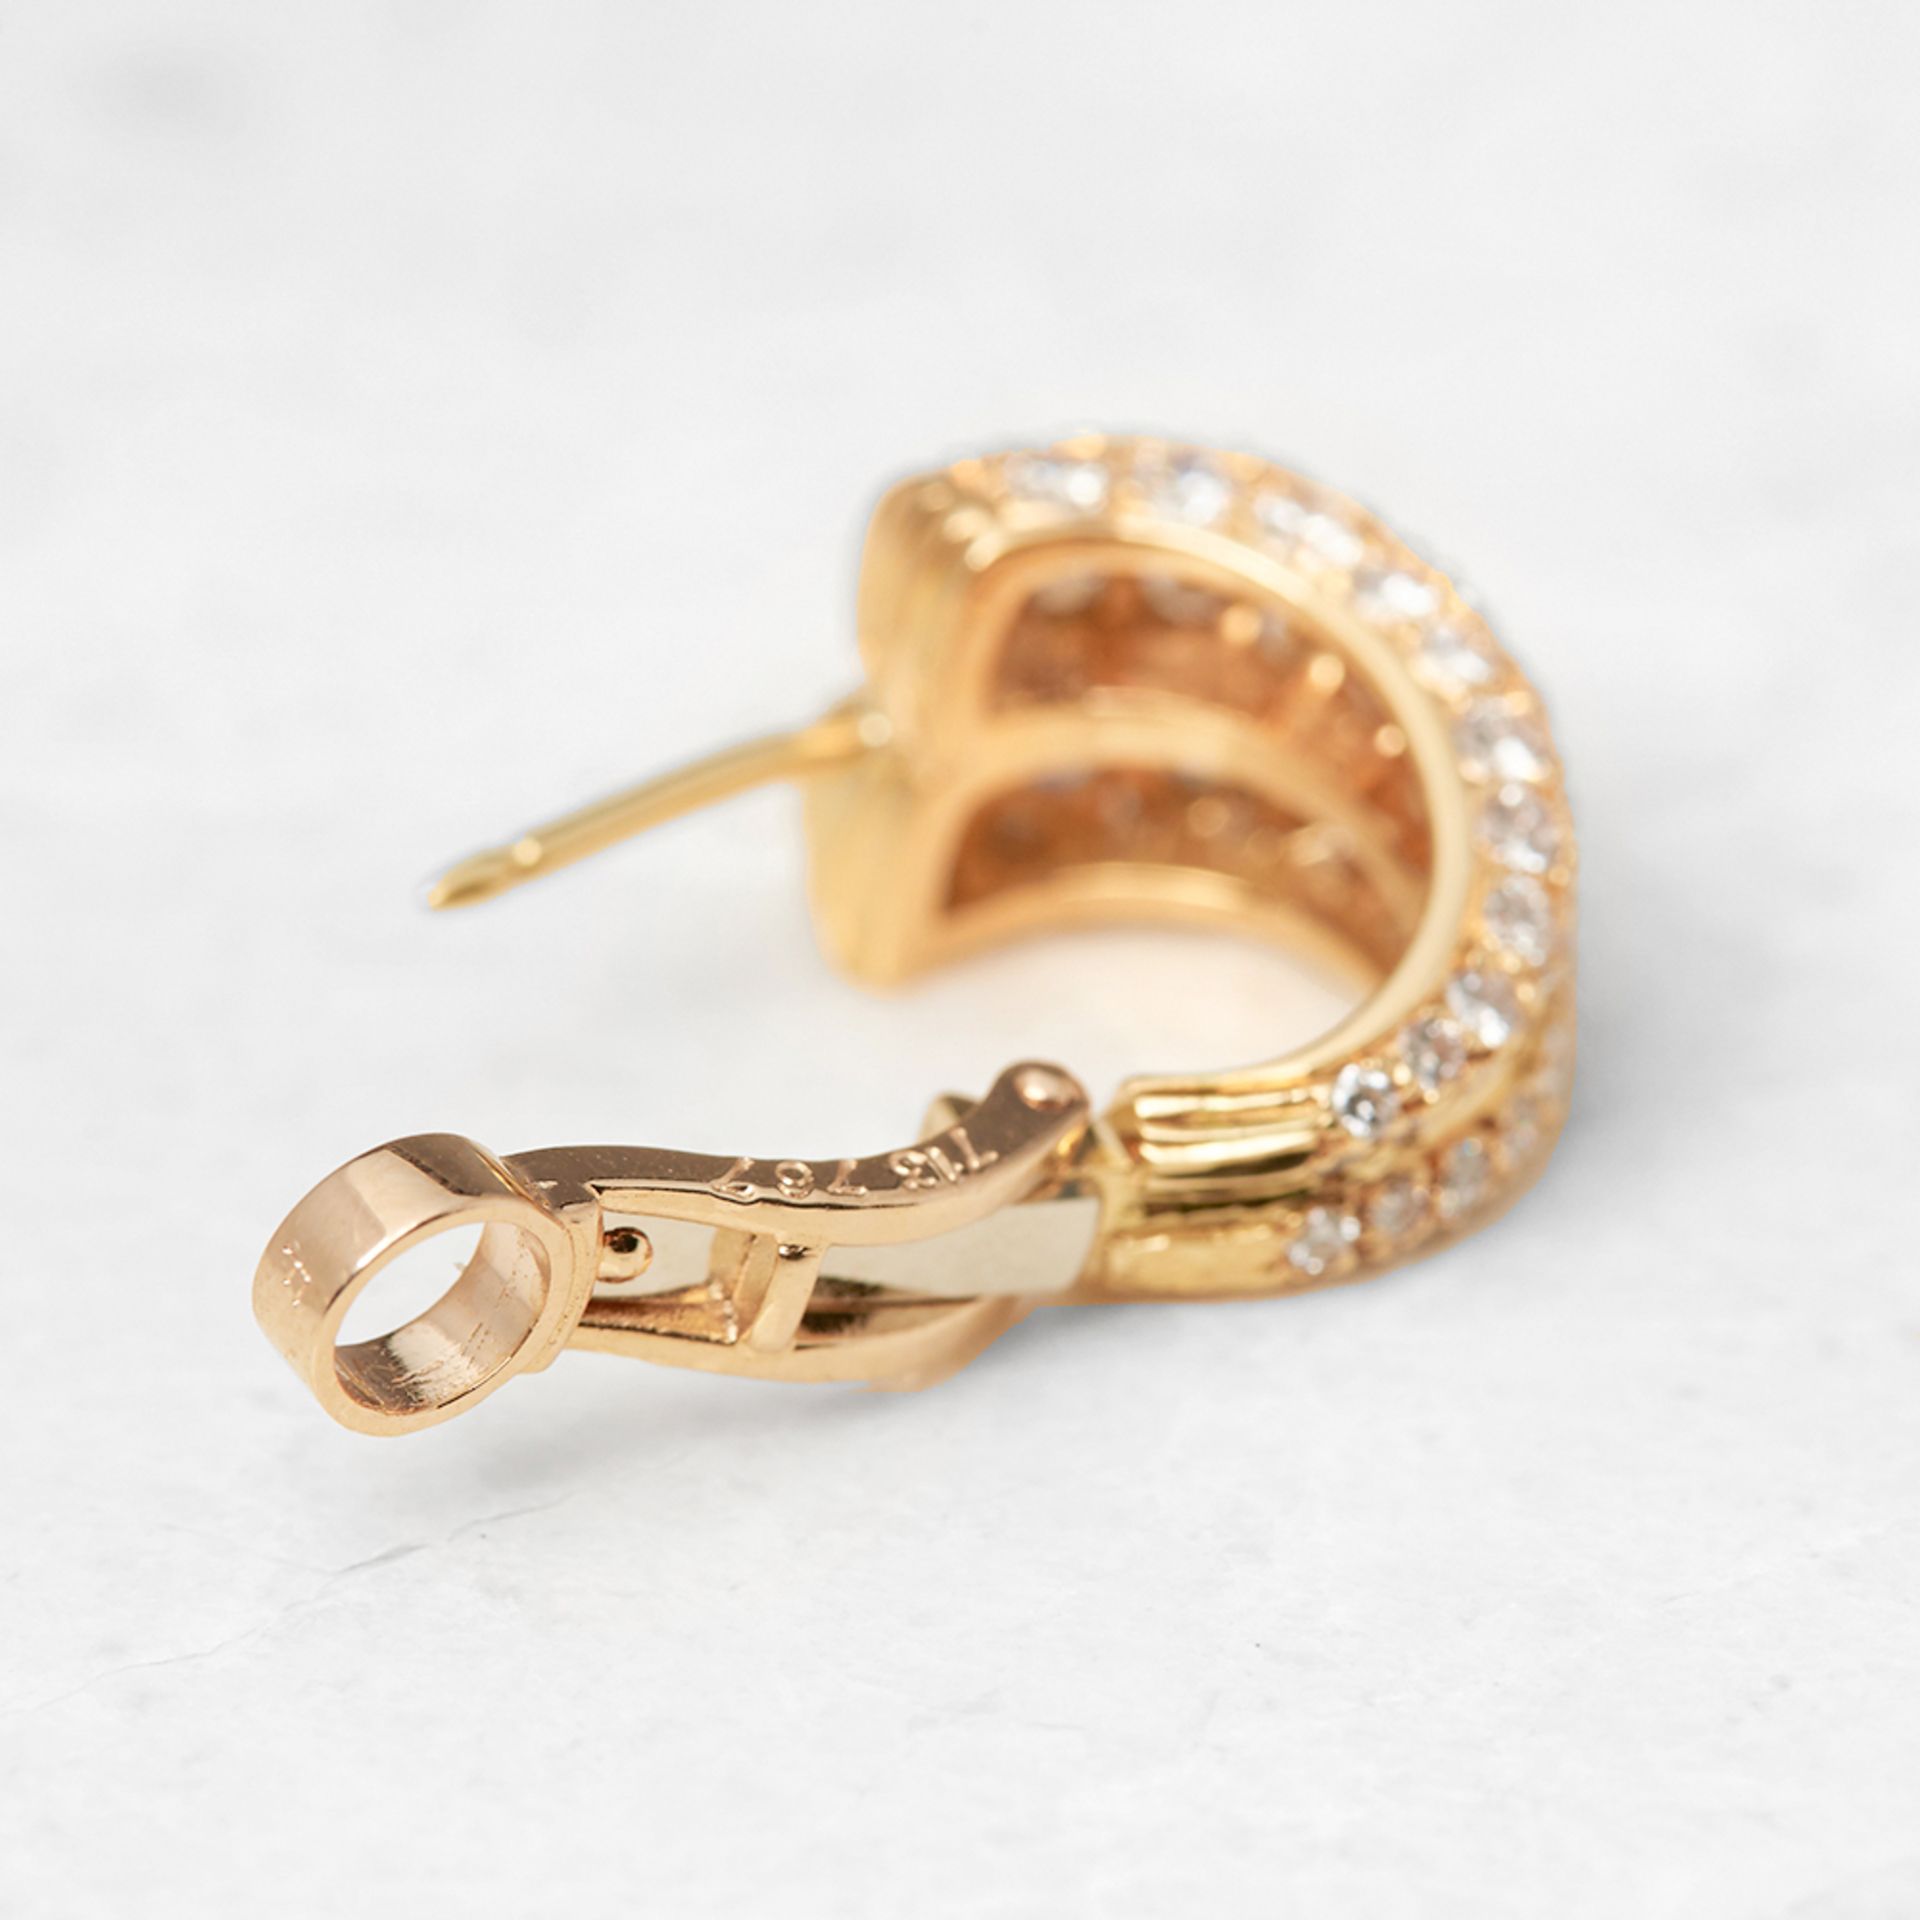 Cartier 18k Yellow Gold Diamond Double Hoop Earrings with Cartier Box - Image 6 of 10